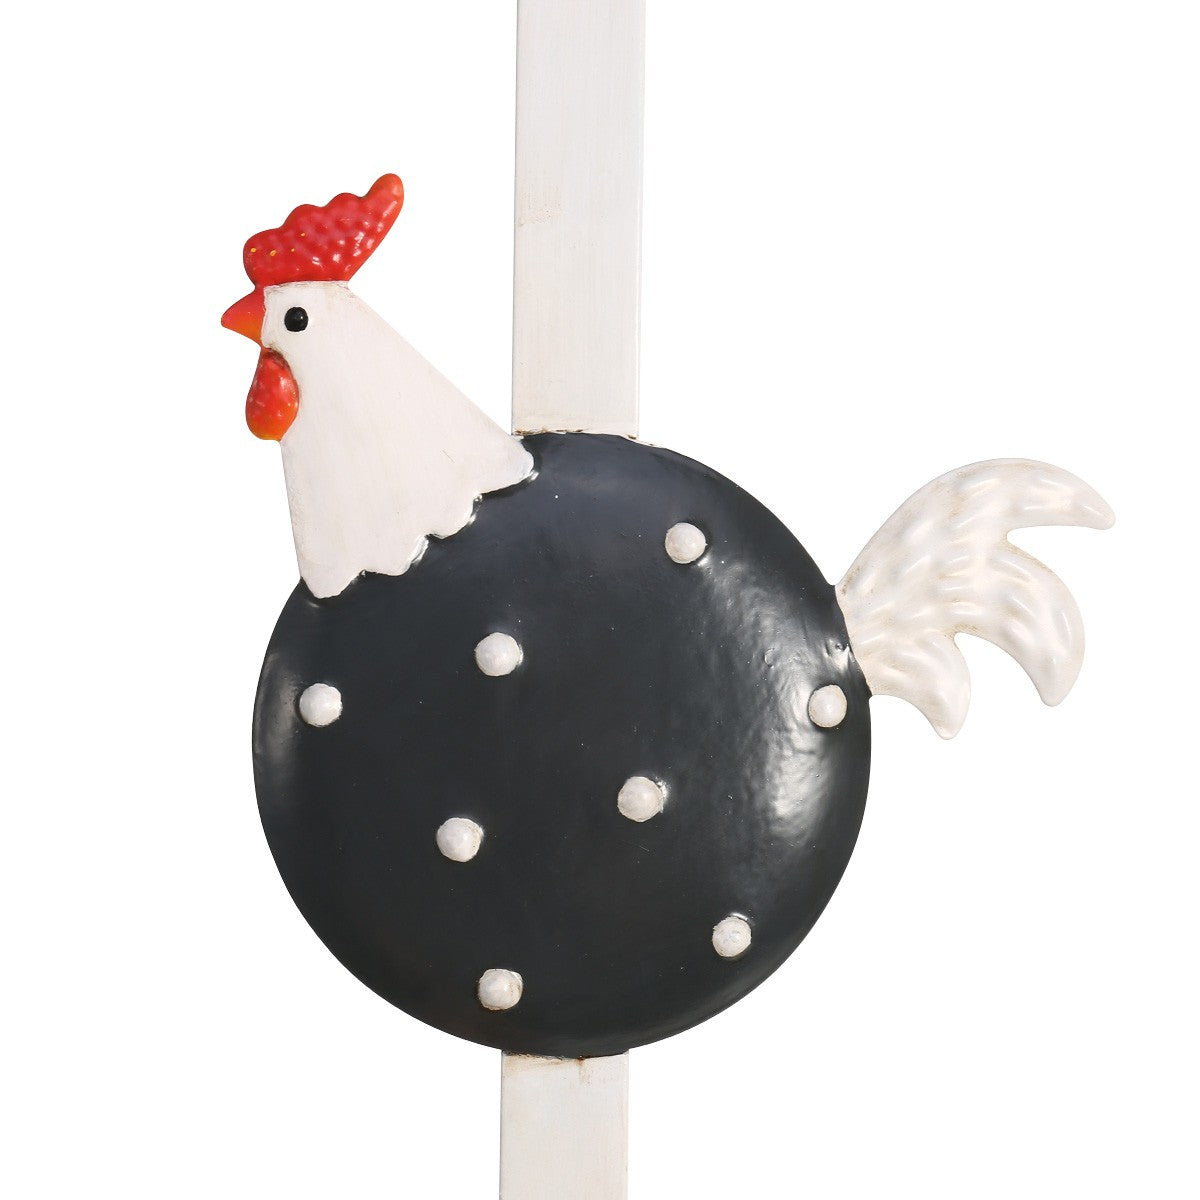 Chicken Decor and Chicken Ornaments with Door Hanger and Door Hook for Rooster Kitchen Decor